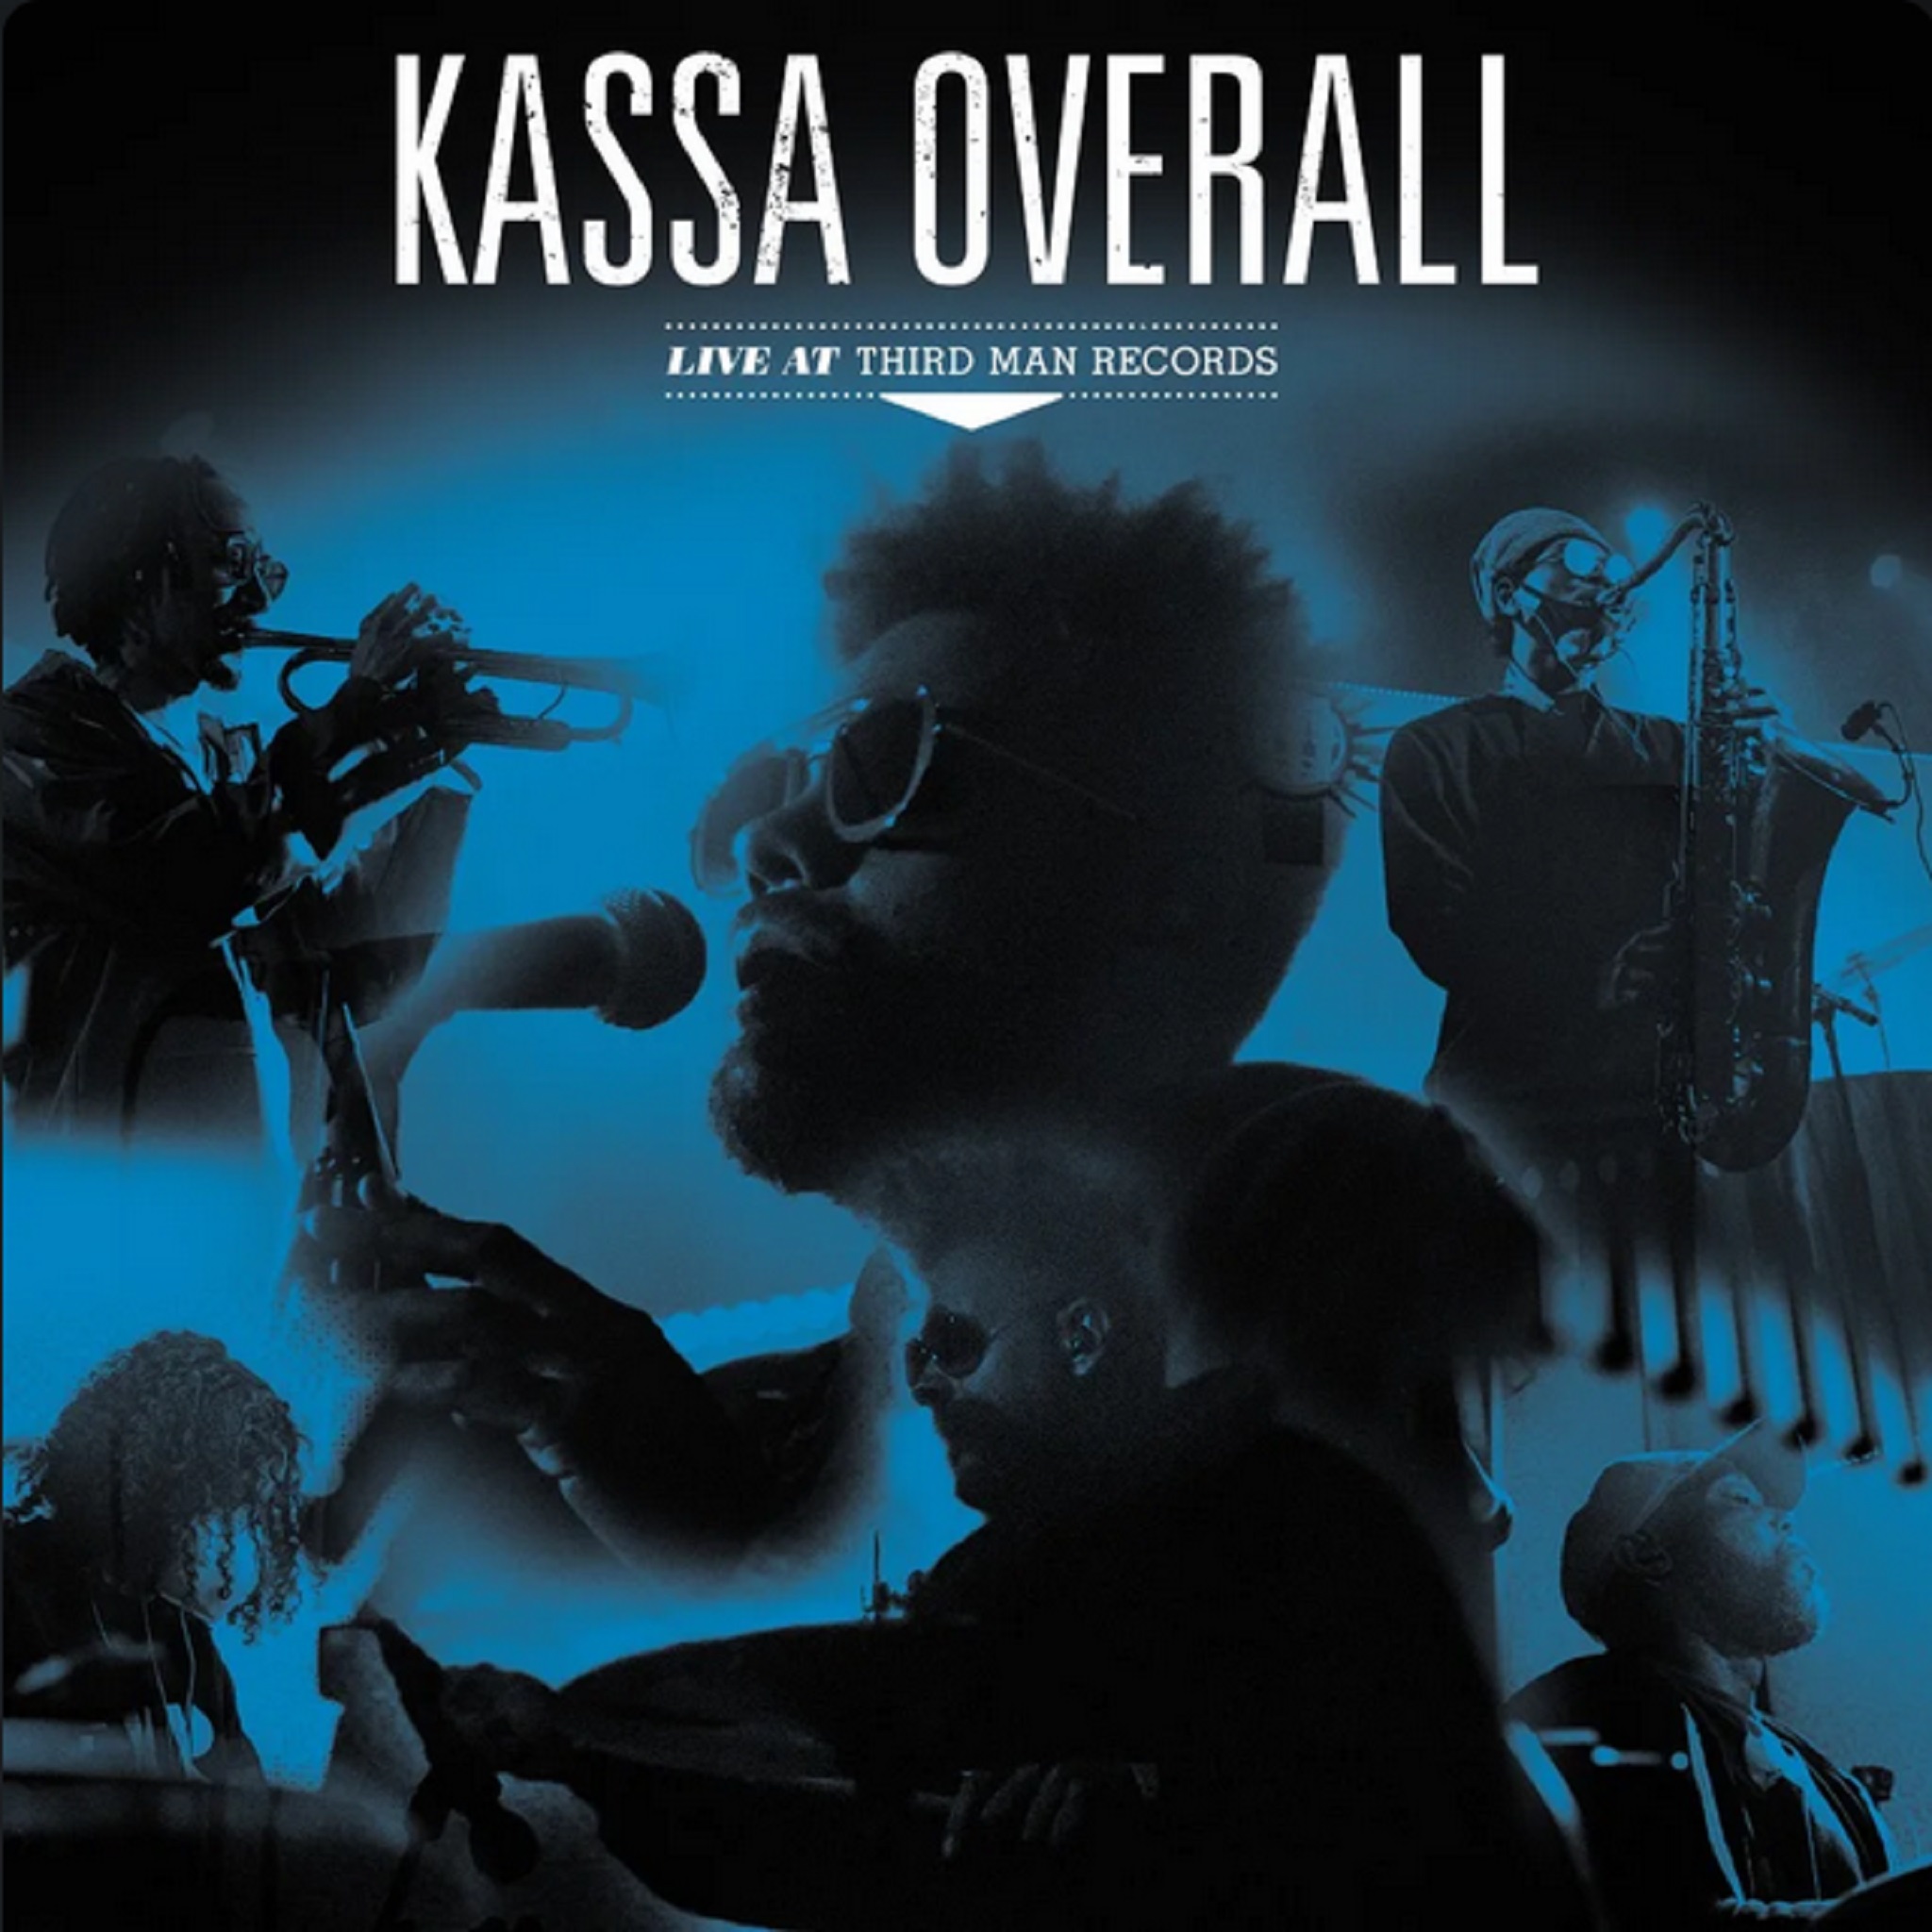 Kassa Overall Announces "Live at Third Man Records" LP Out Digitally & Vinyl on April 19